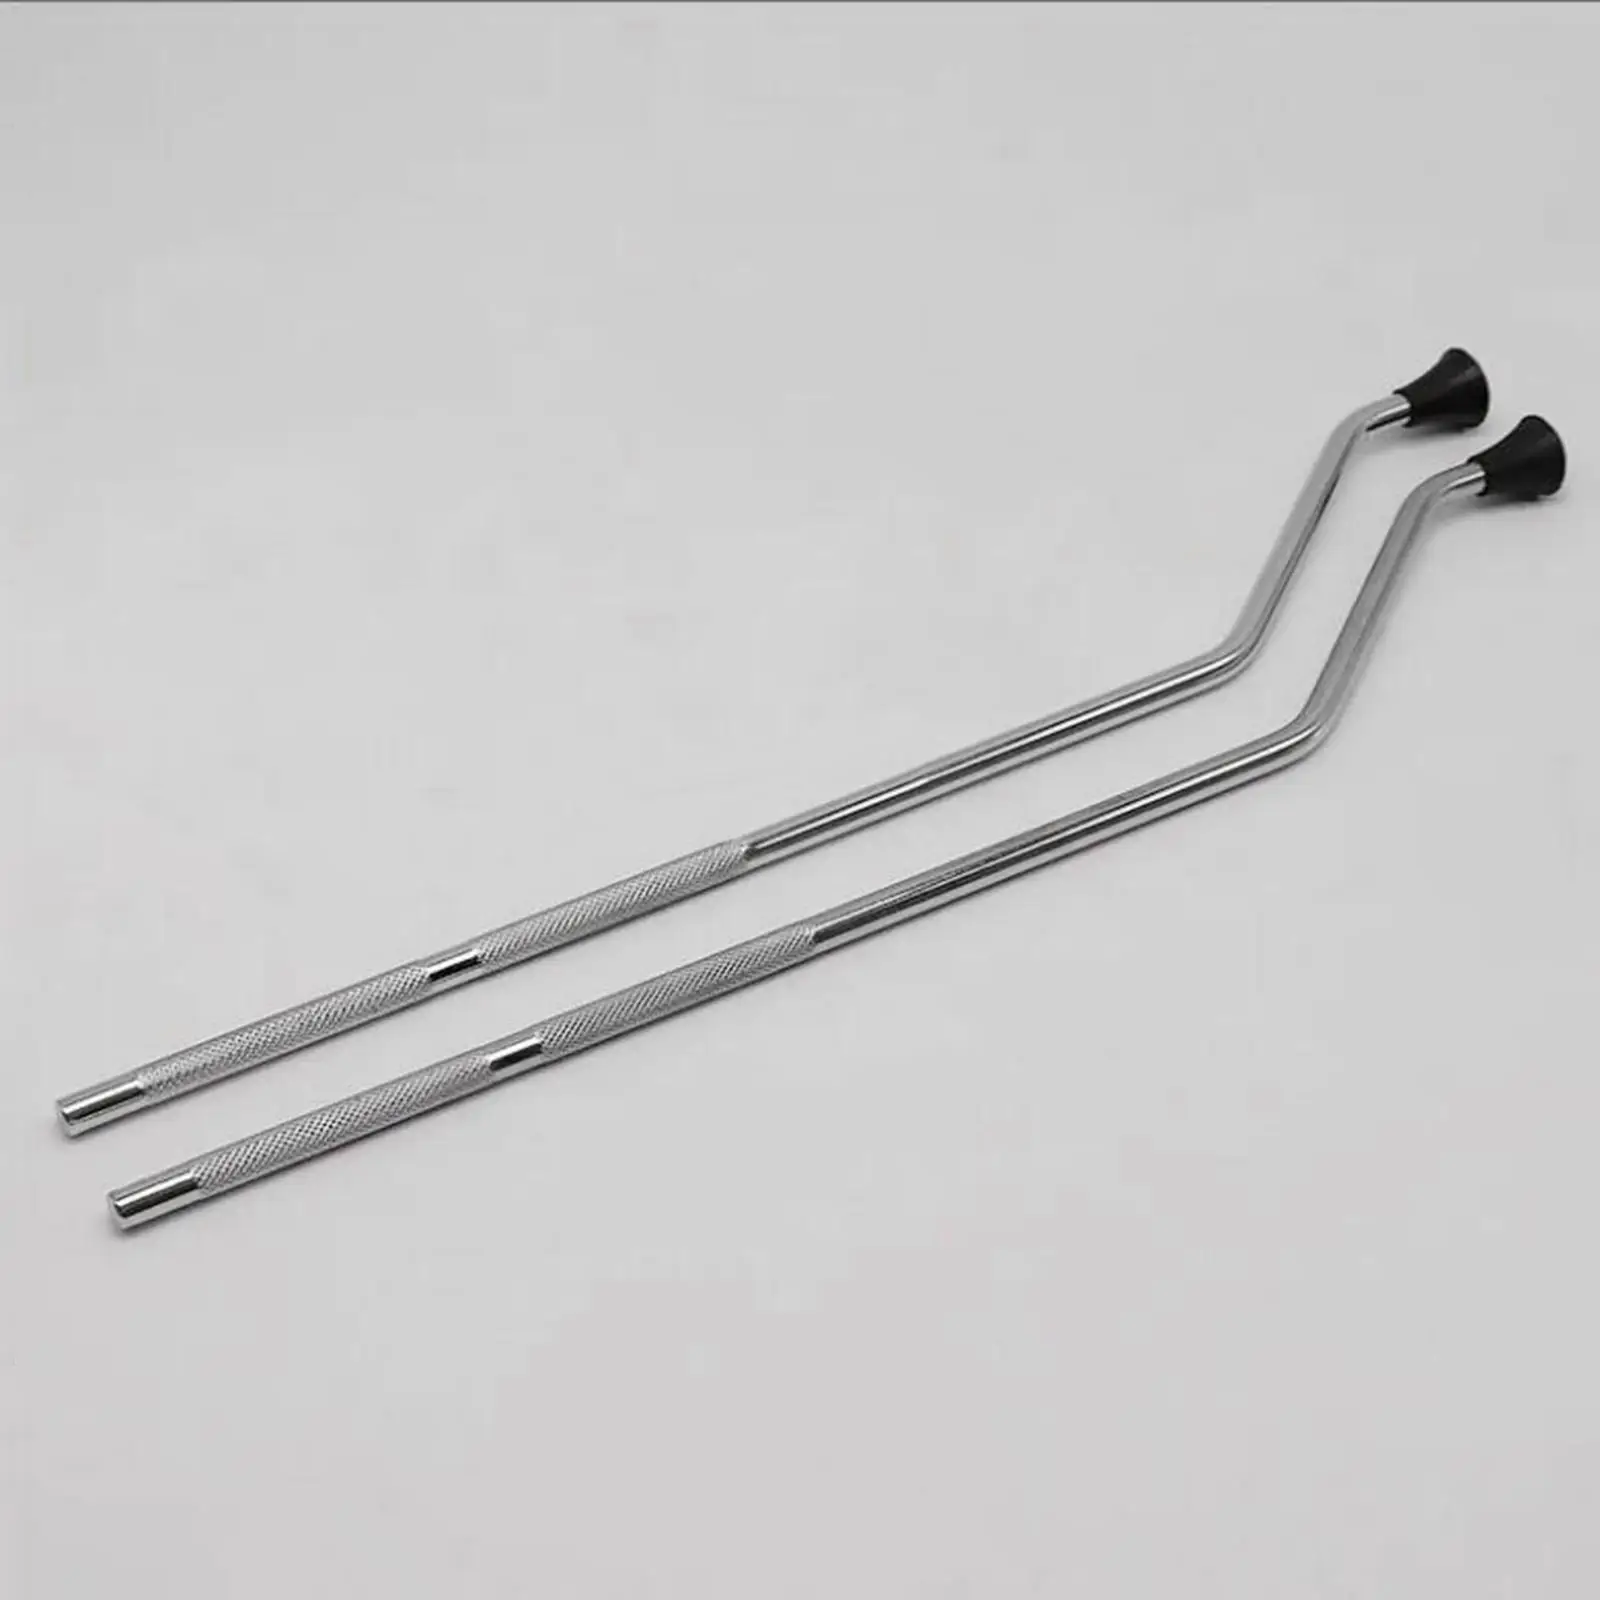 2 Pieces Floor Tom Drum Legs Sturdy Easy to Install Non Slip Tom Stand Drum Hardware Drum Parts Replacement Percussion Parts DIY